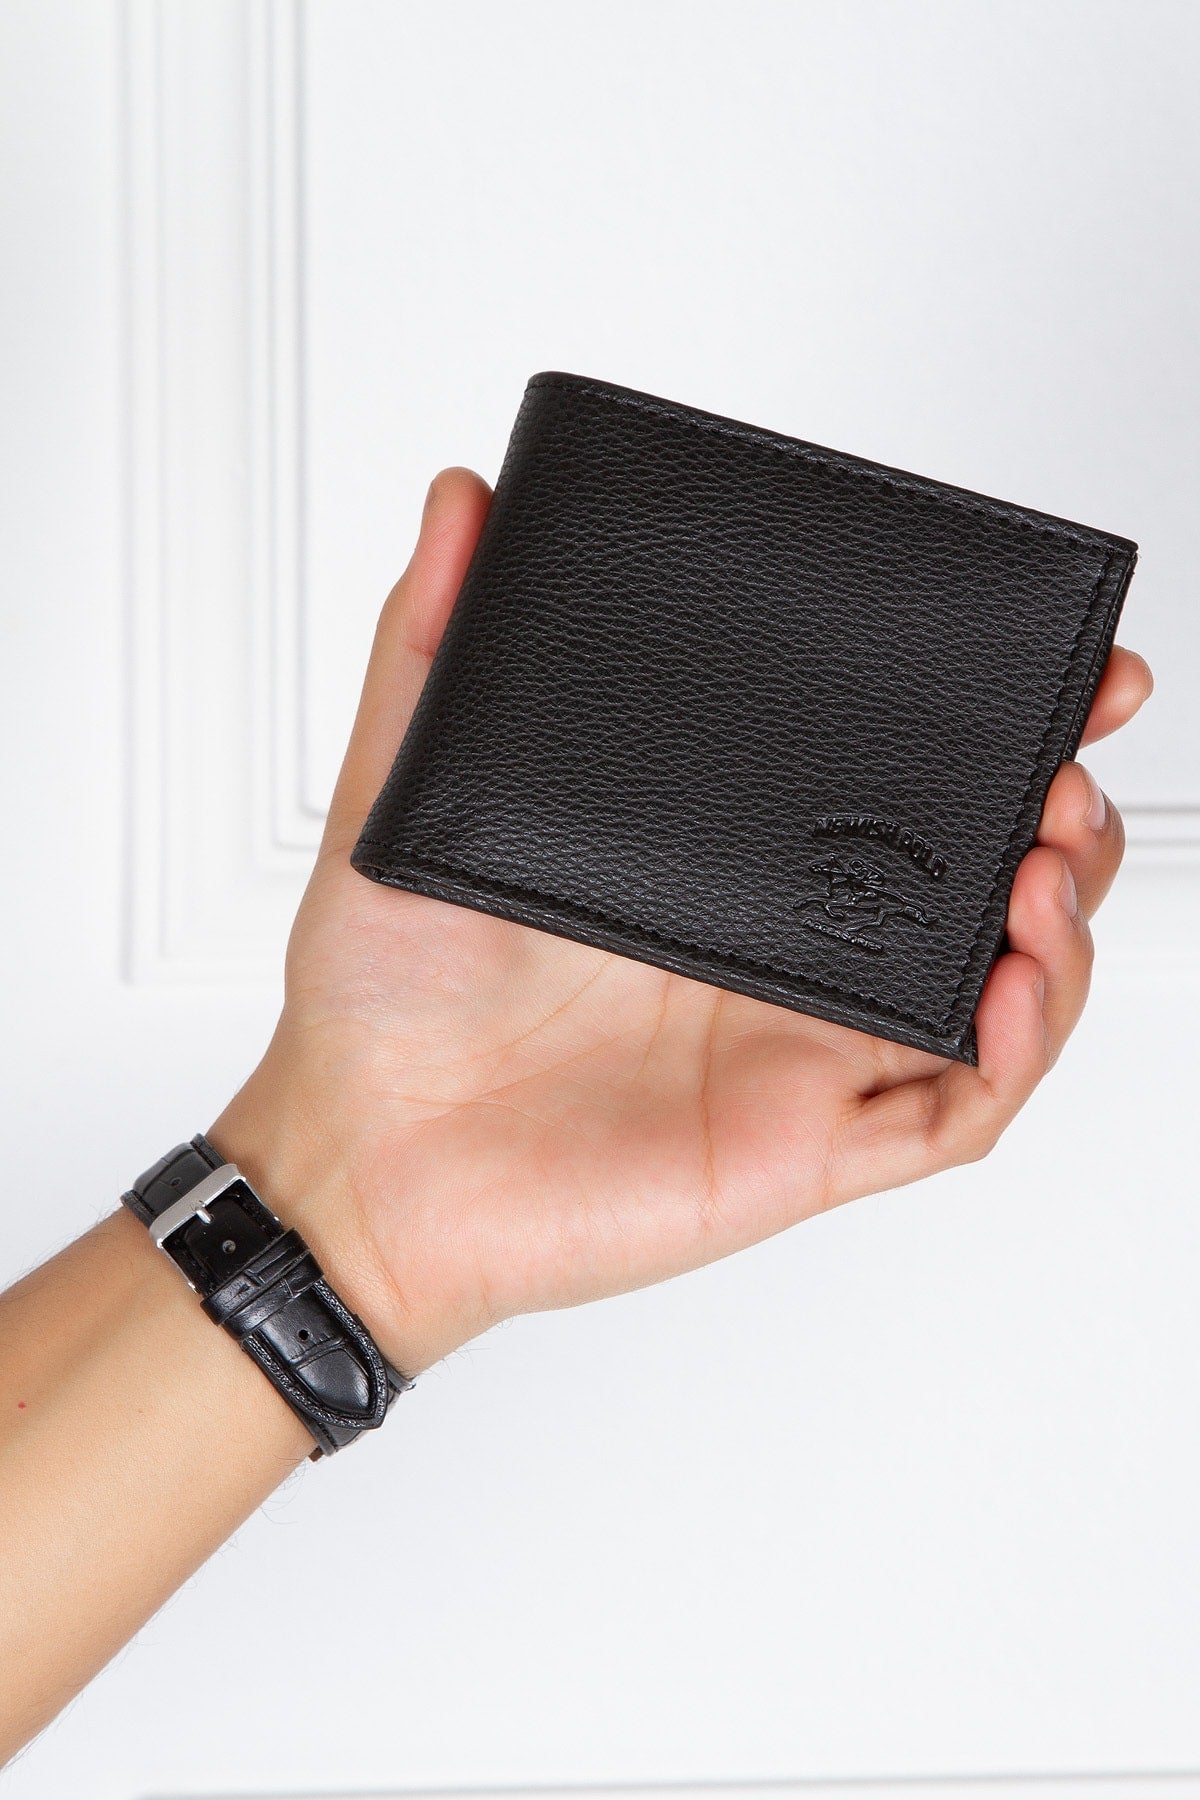 Black Color Wallet Men's Wallet With Coin Holder Card Compartment